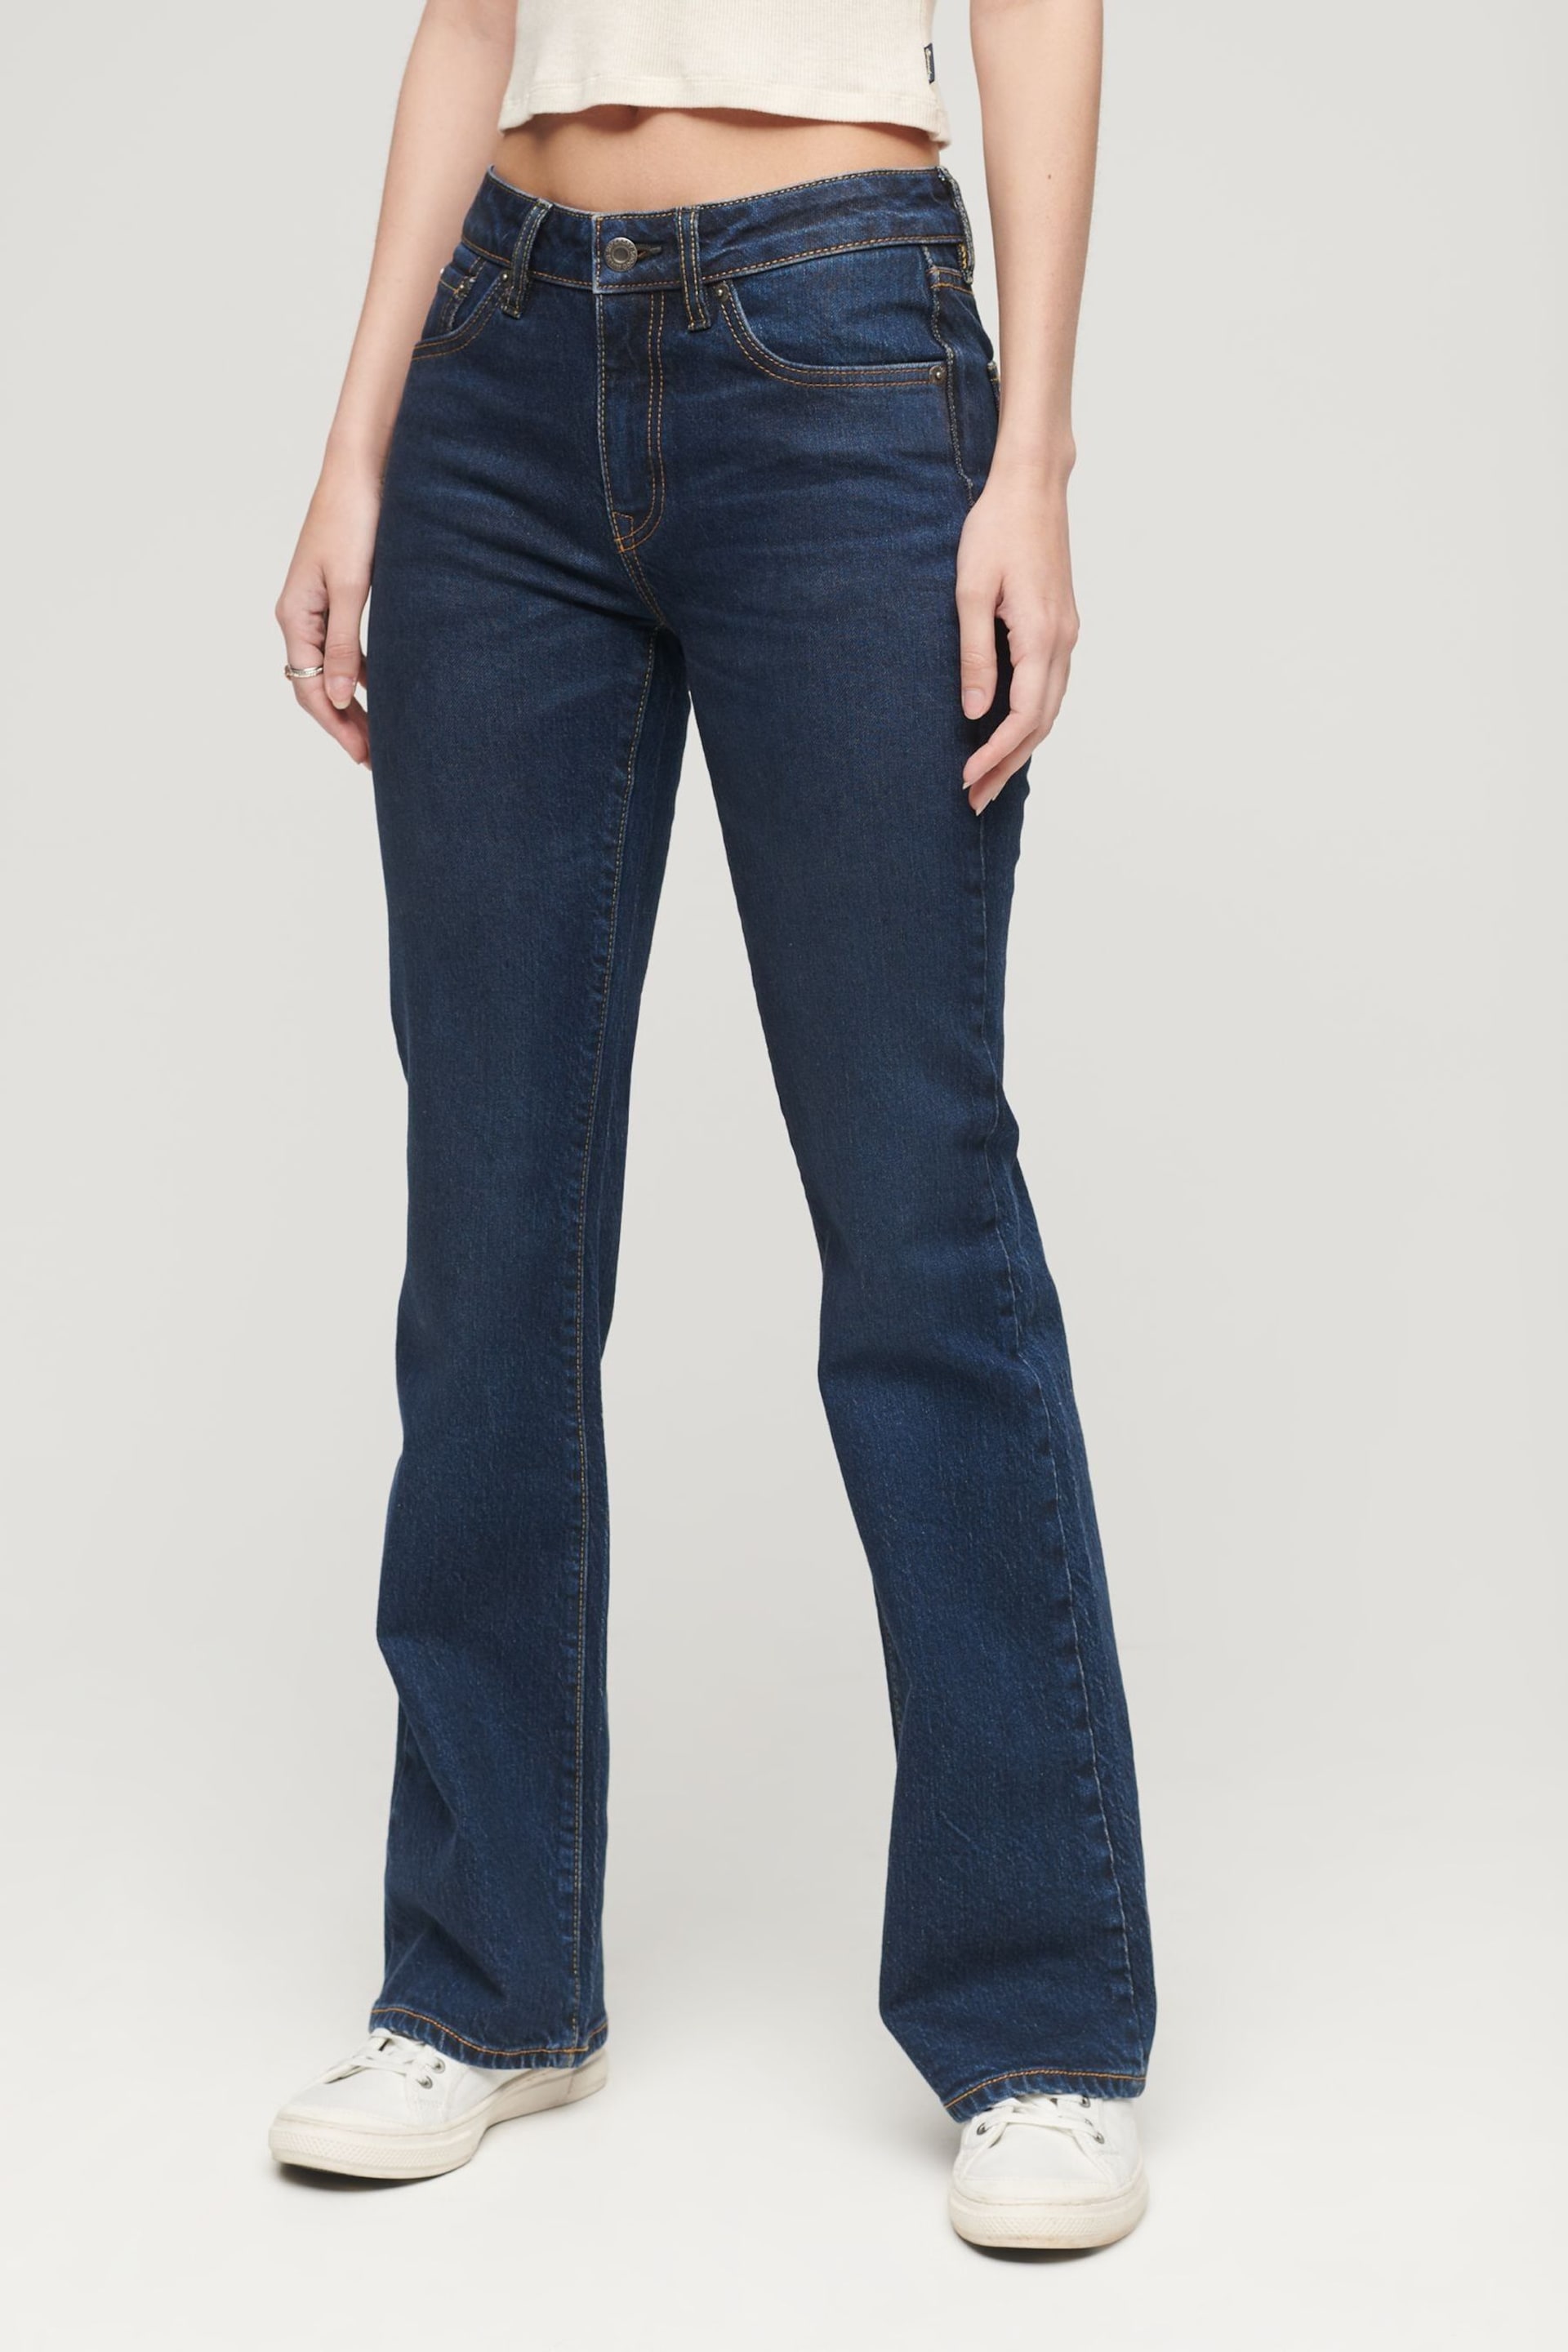 Superdry Blue Mid Rise Slim Flare Jeans - Image 1 of 8